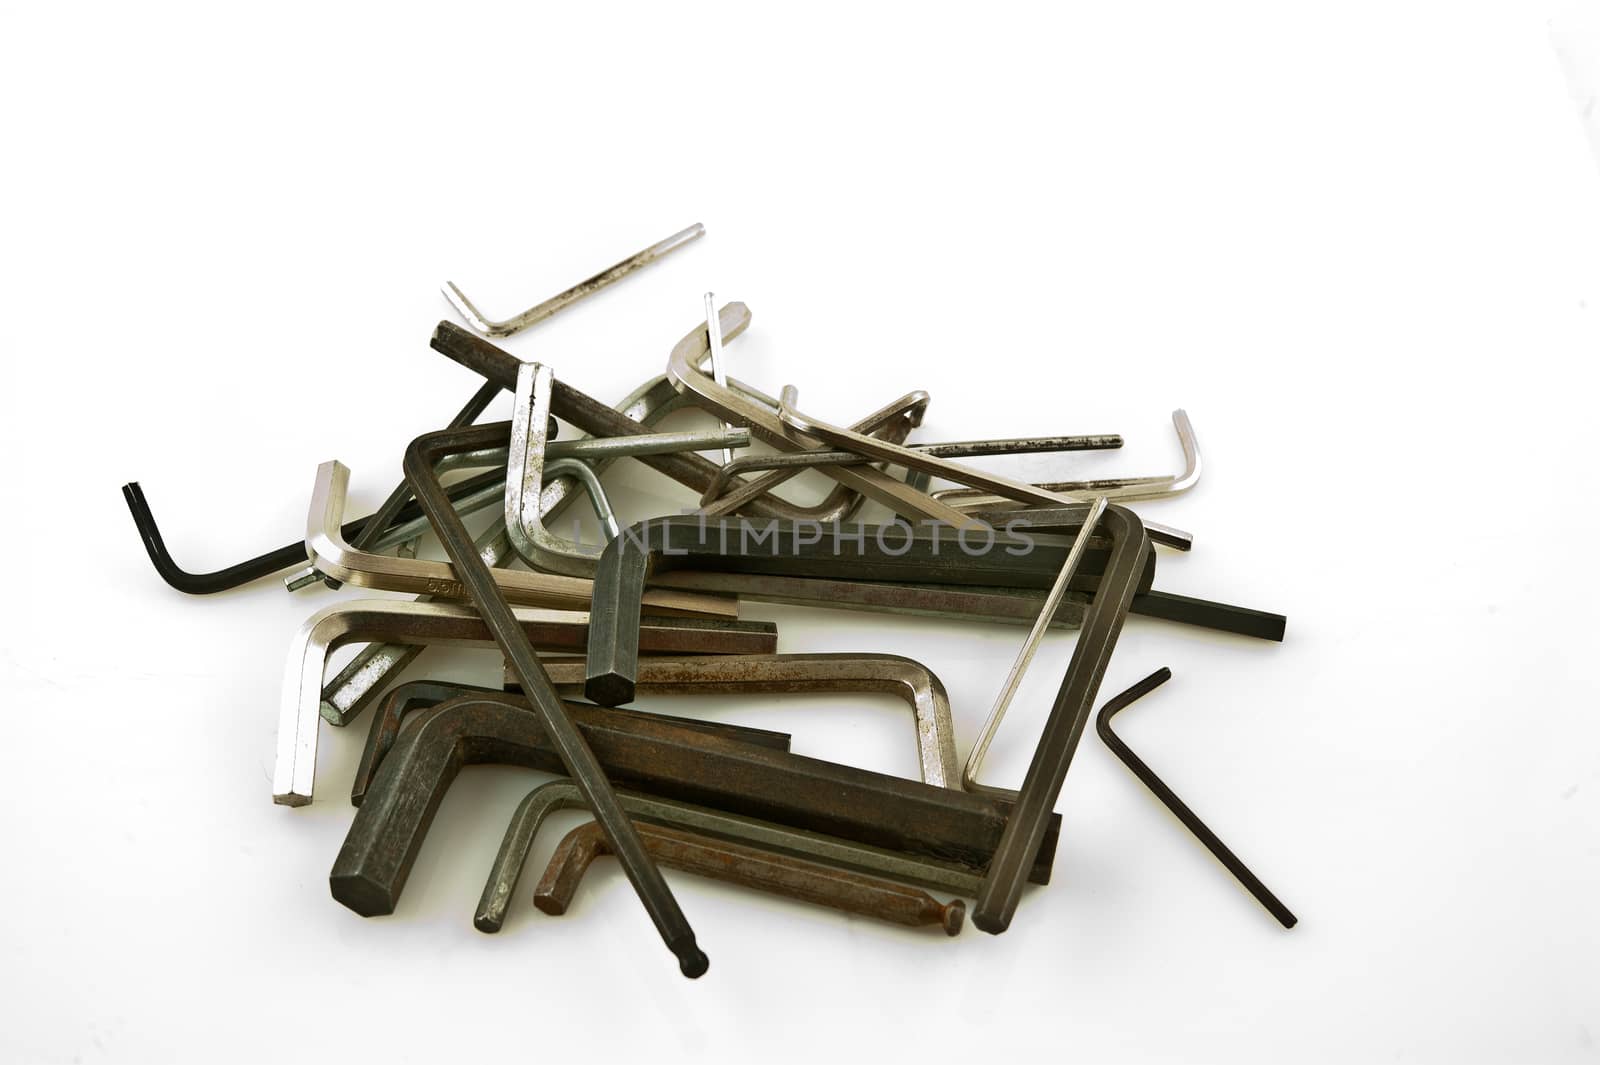 
Pile of hexagon wrenches stacked in a row, or sprinkled on the white paper